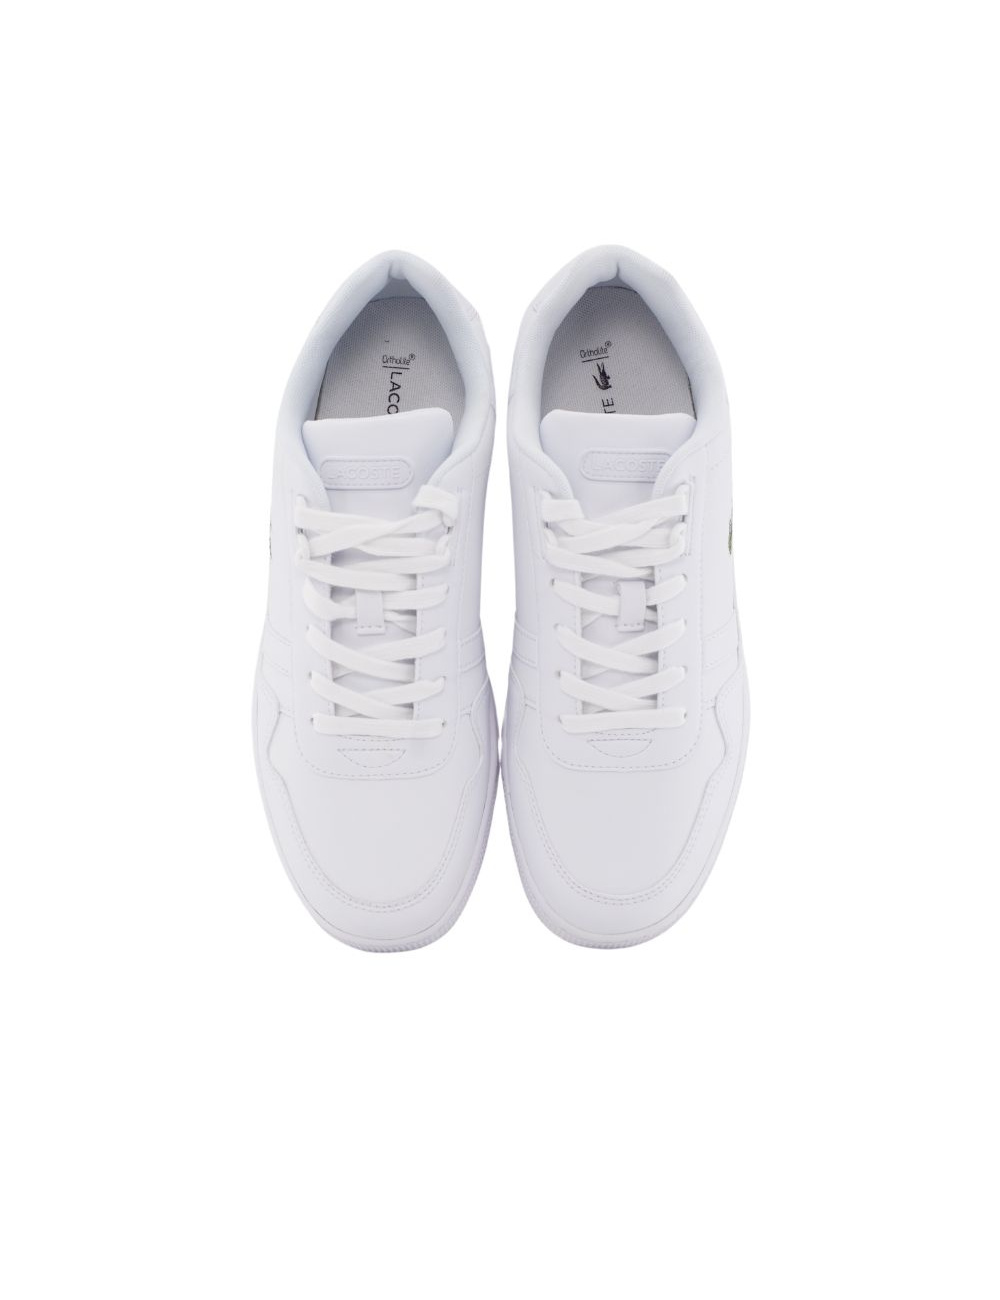 LACOSTE SNEAKERS T-CLIP LEATHER AND SYNTHETHIC 43SMA0023 HOMBRE